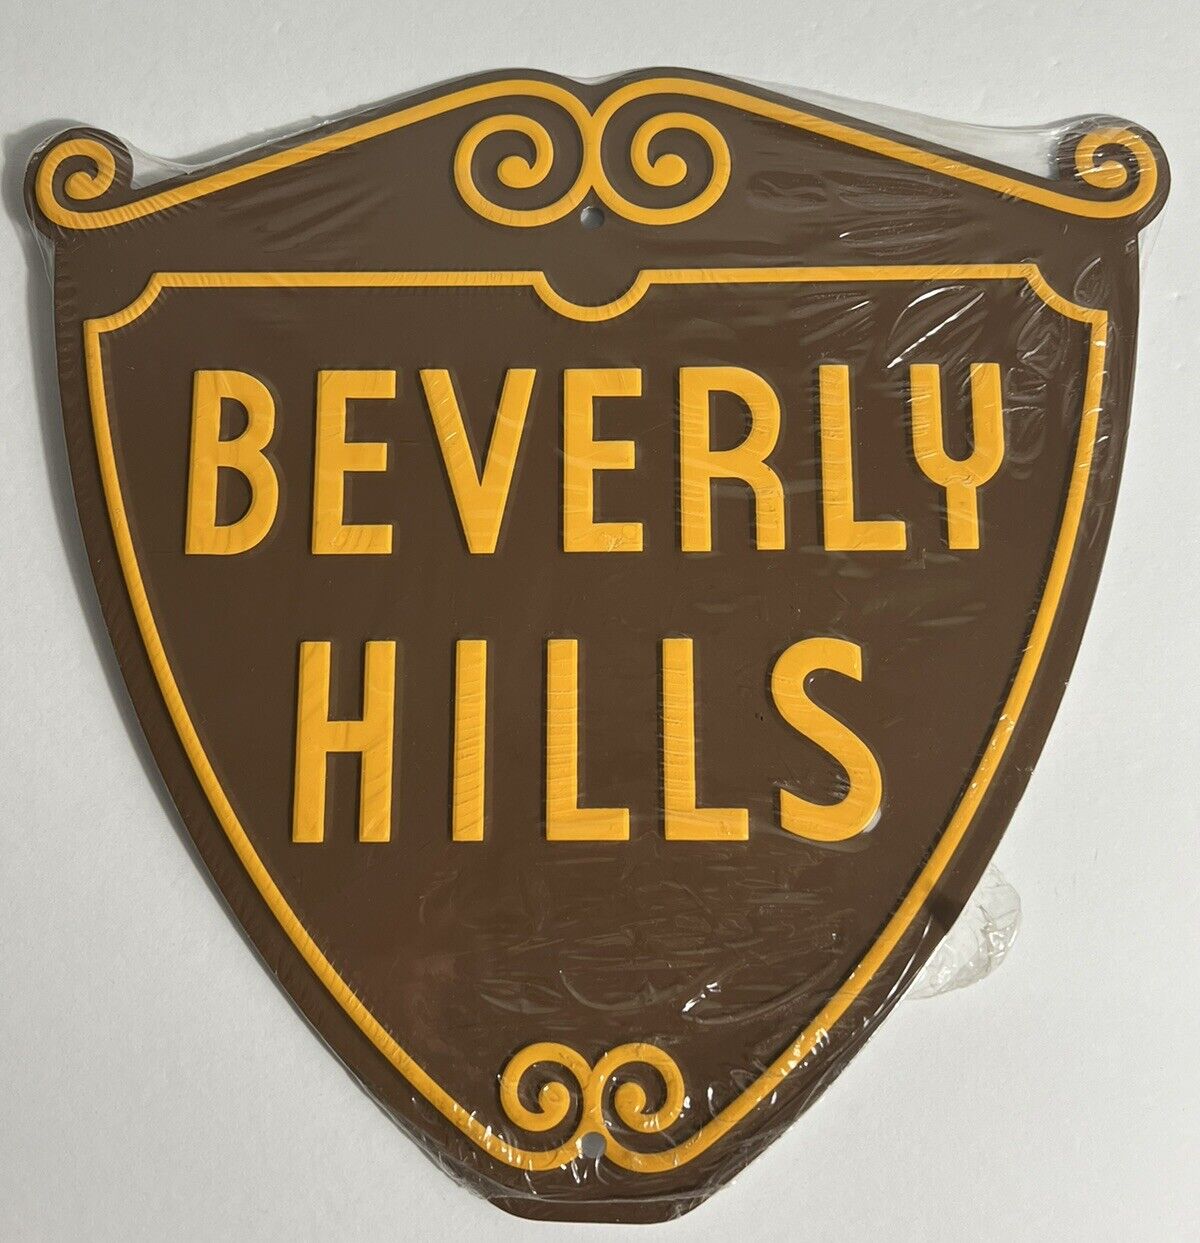 NEW Sealed Beverly Hills California Iconic Shield Street Sign Souvenirs